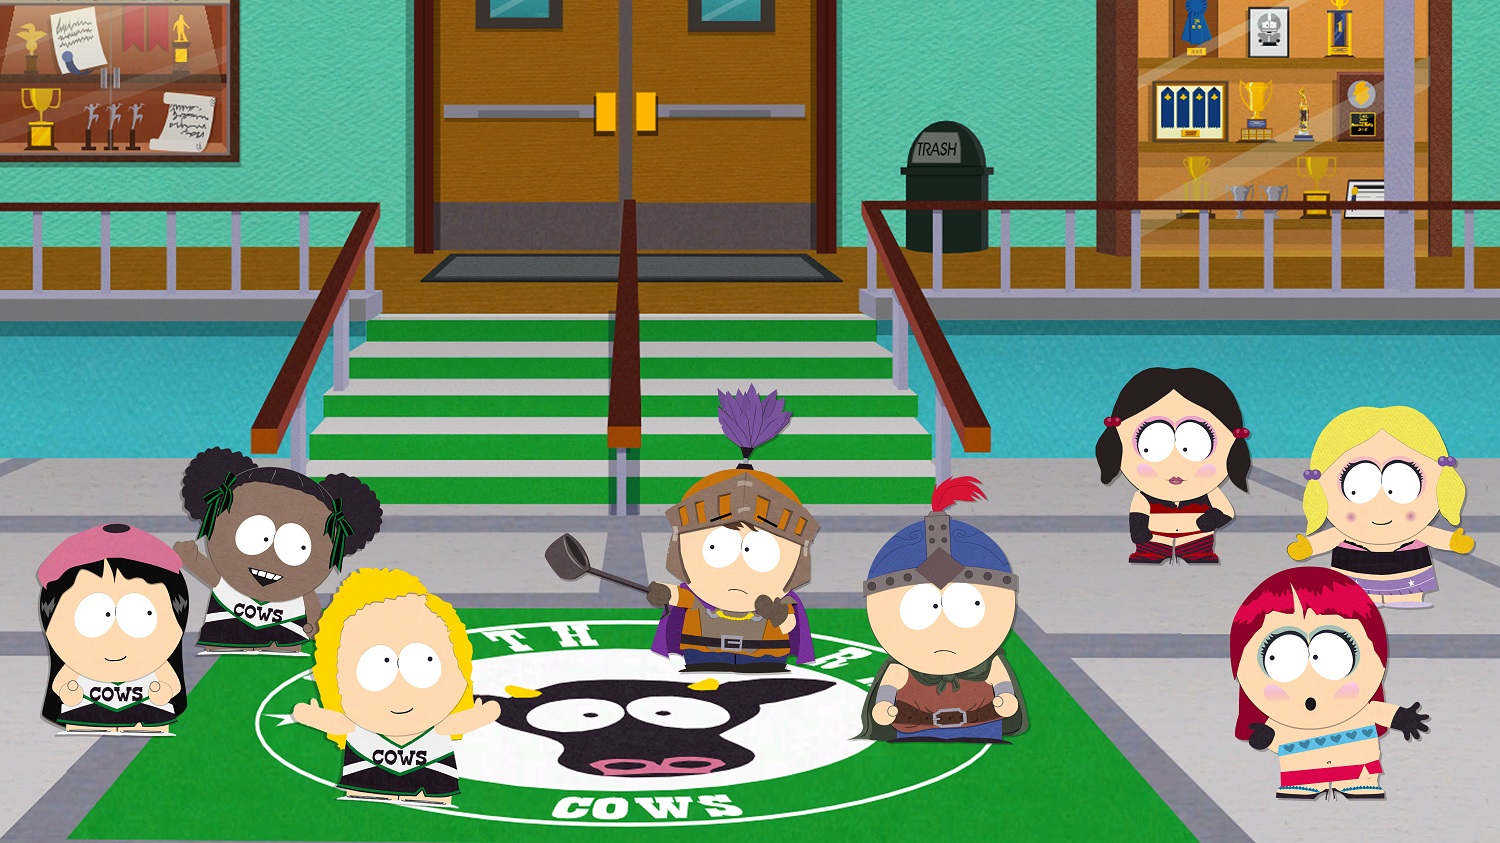 Have some South Park: The Stick of Truth screenshots with your City.